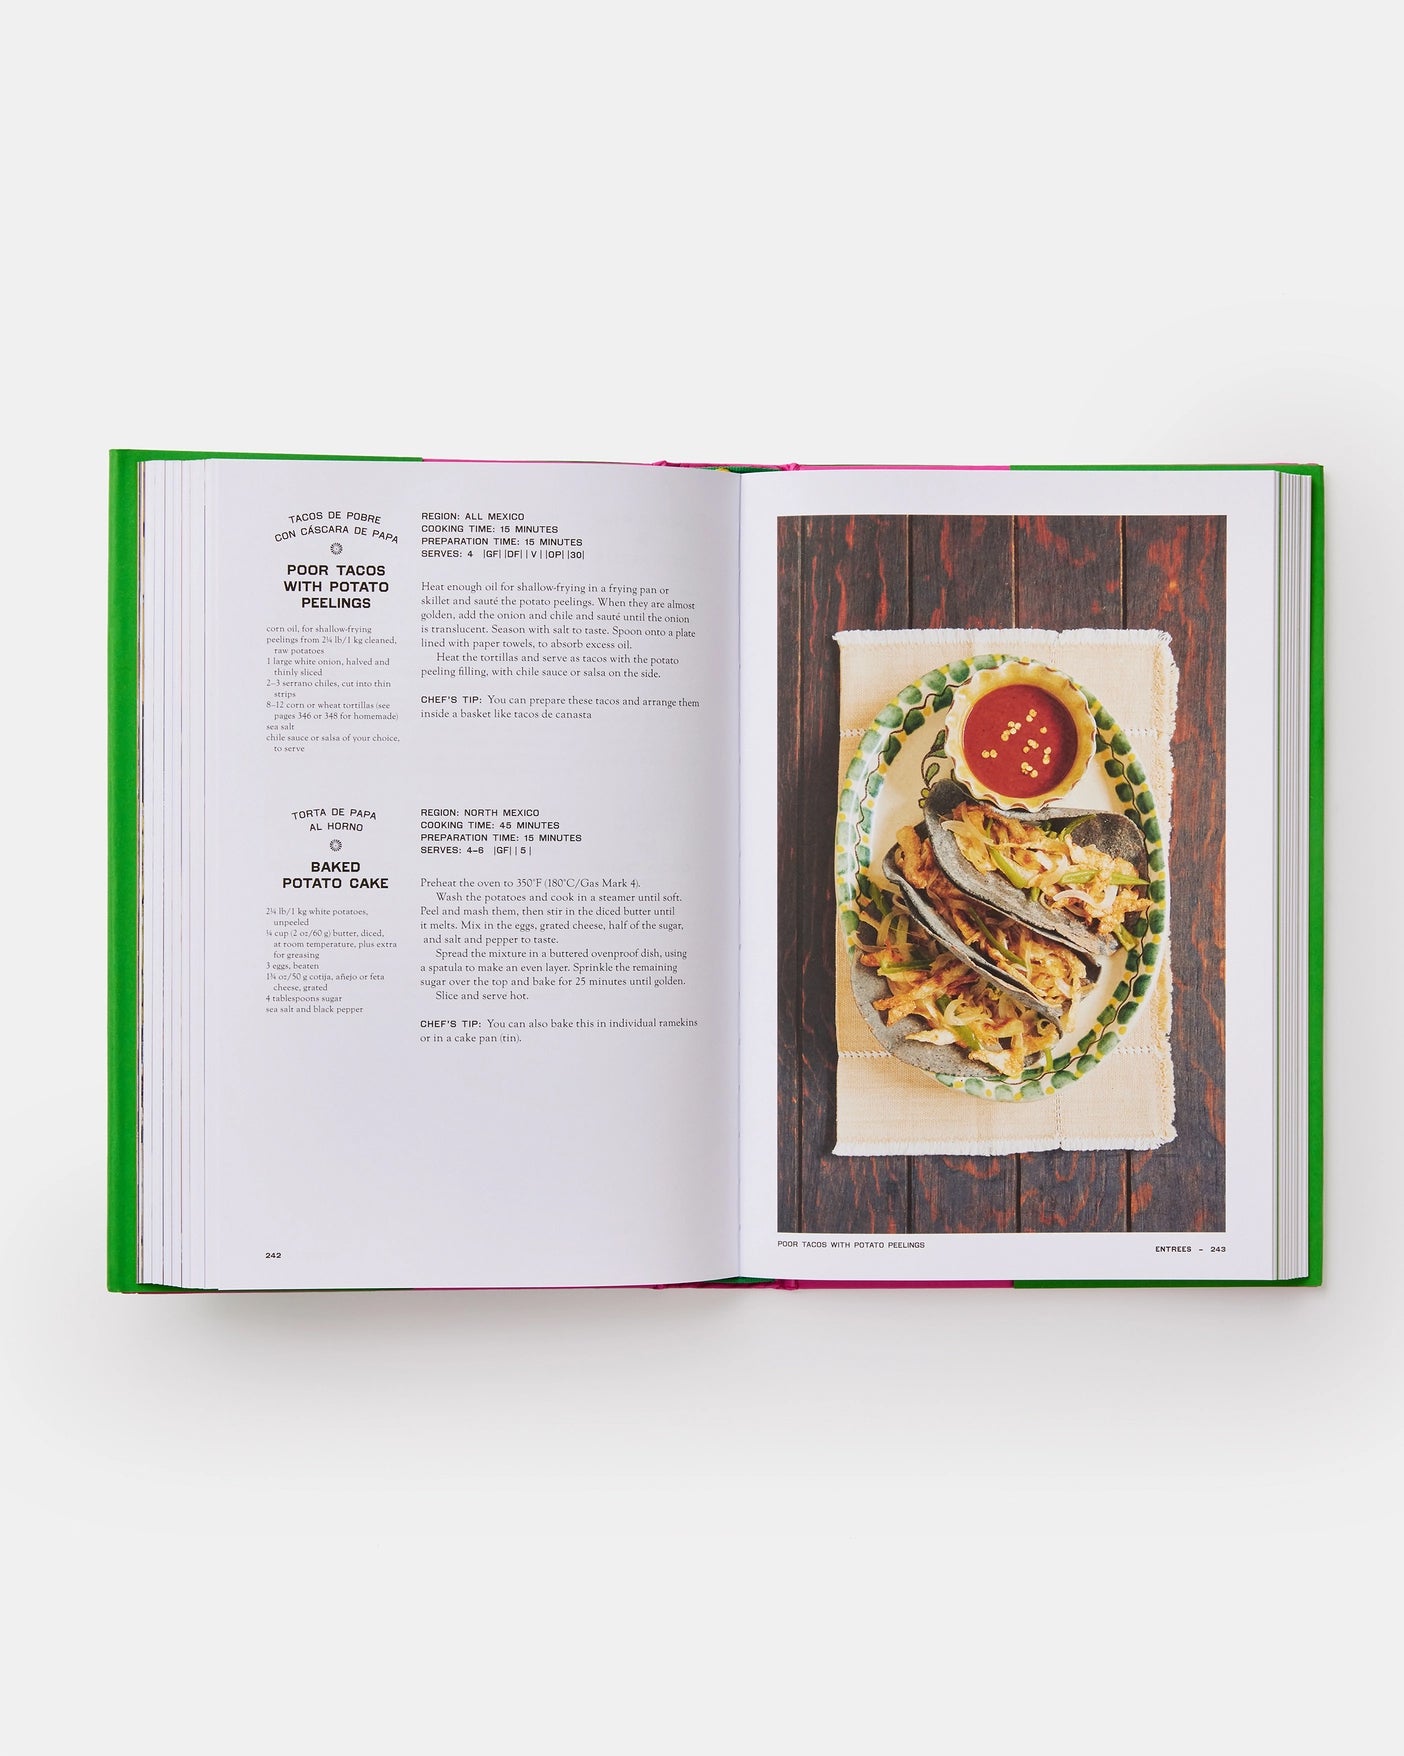 The Mexican Vegetarian Cookbook – Local Nomad